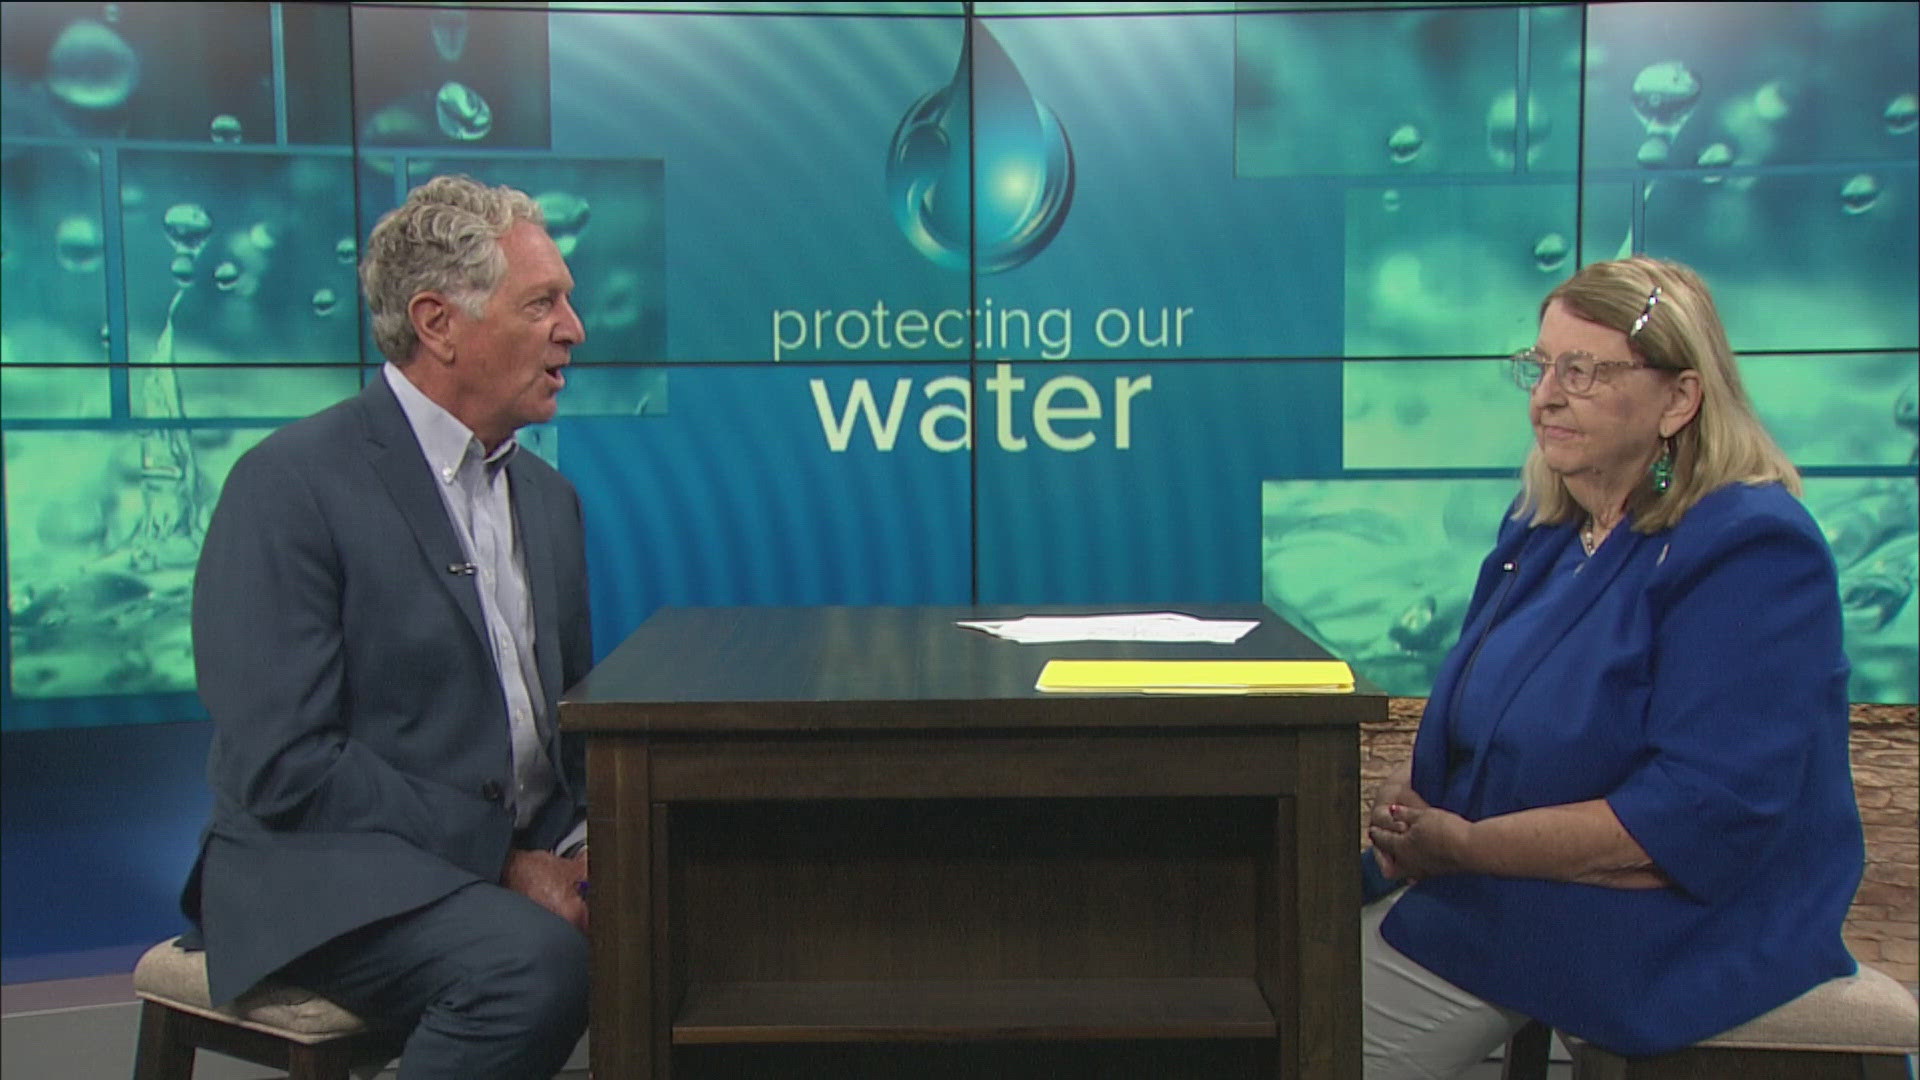 Sandy Bihn with Lake Erie Waterkeeper talks with Dan Cummins about efforts that have been made to keep Lake Erie healthy following the water crisis 10 years ago.